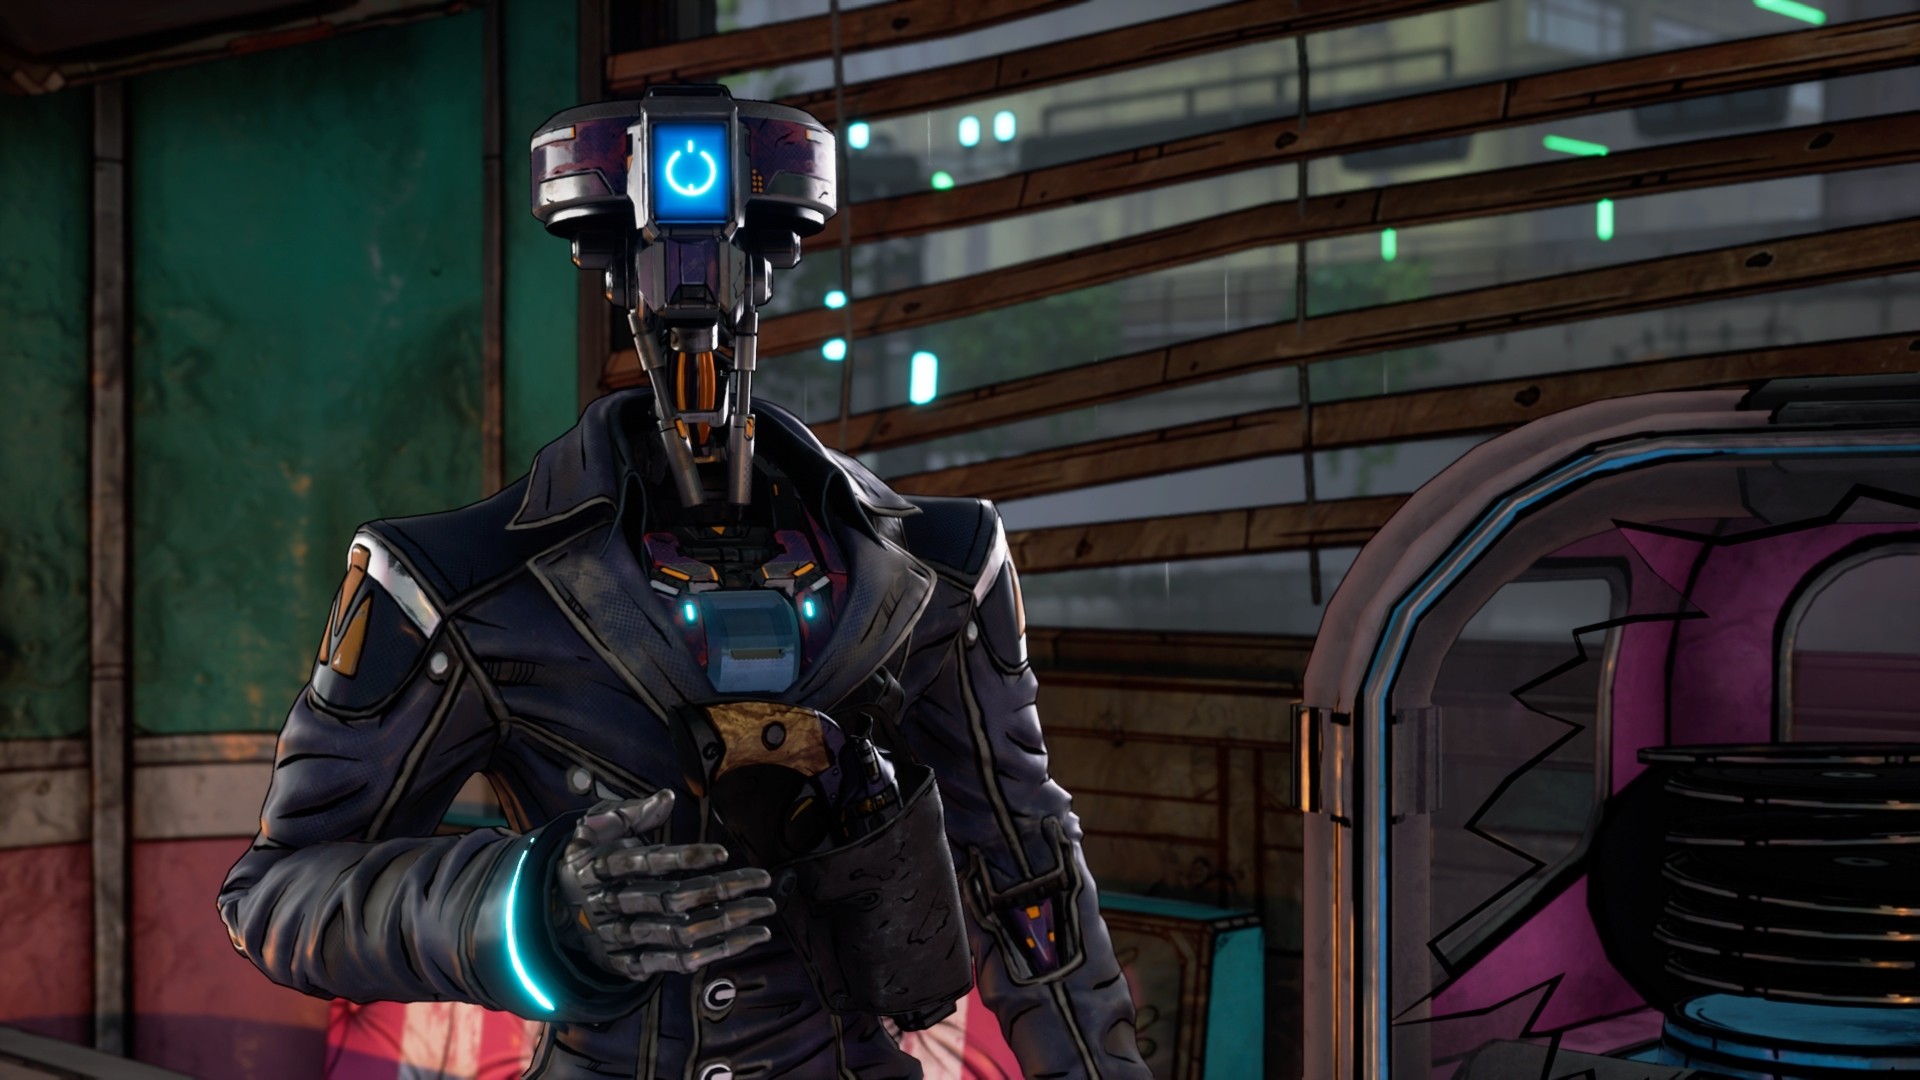 Download New Tales from the Borderlands